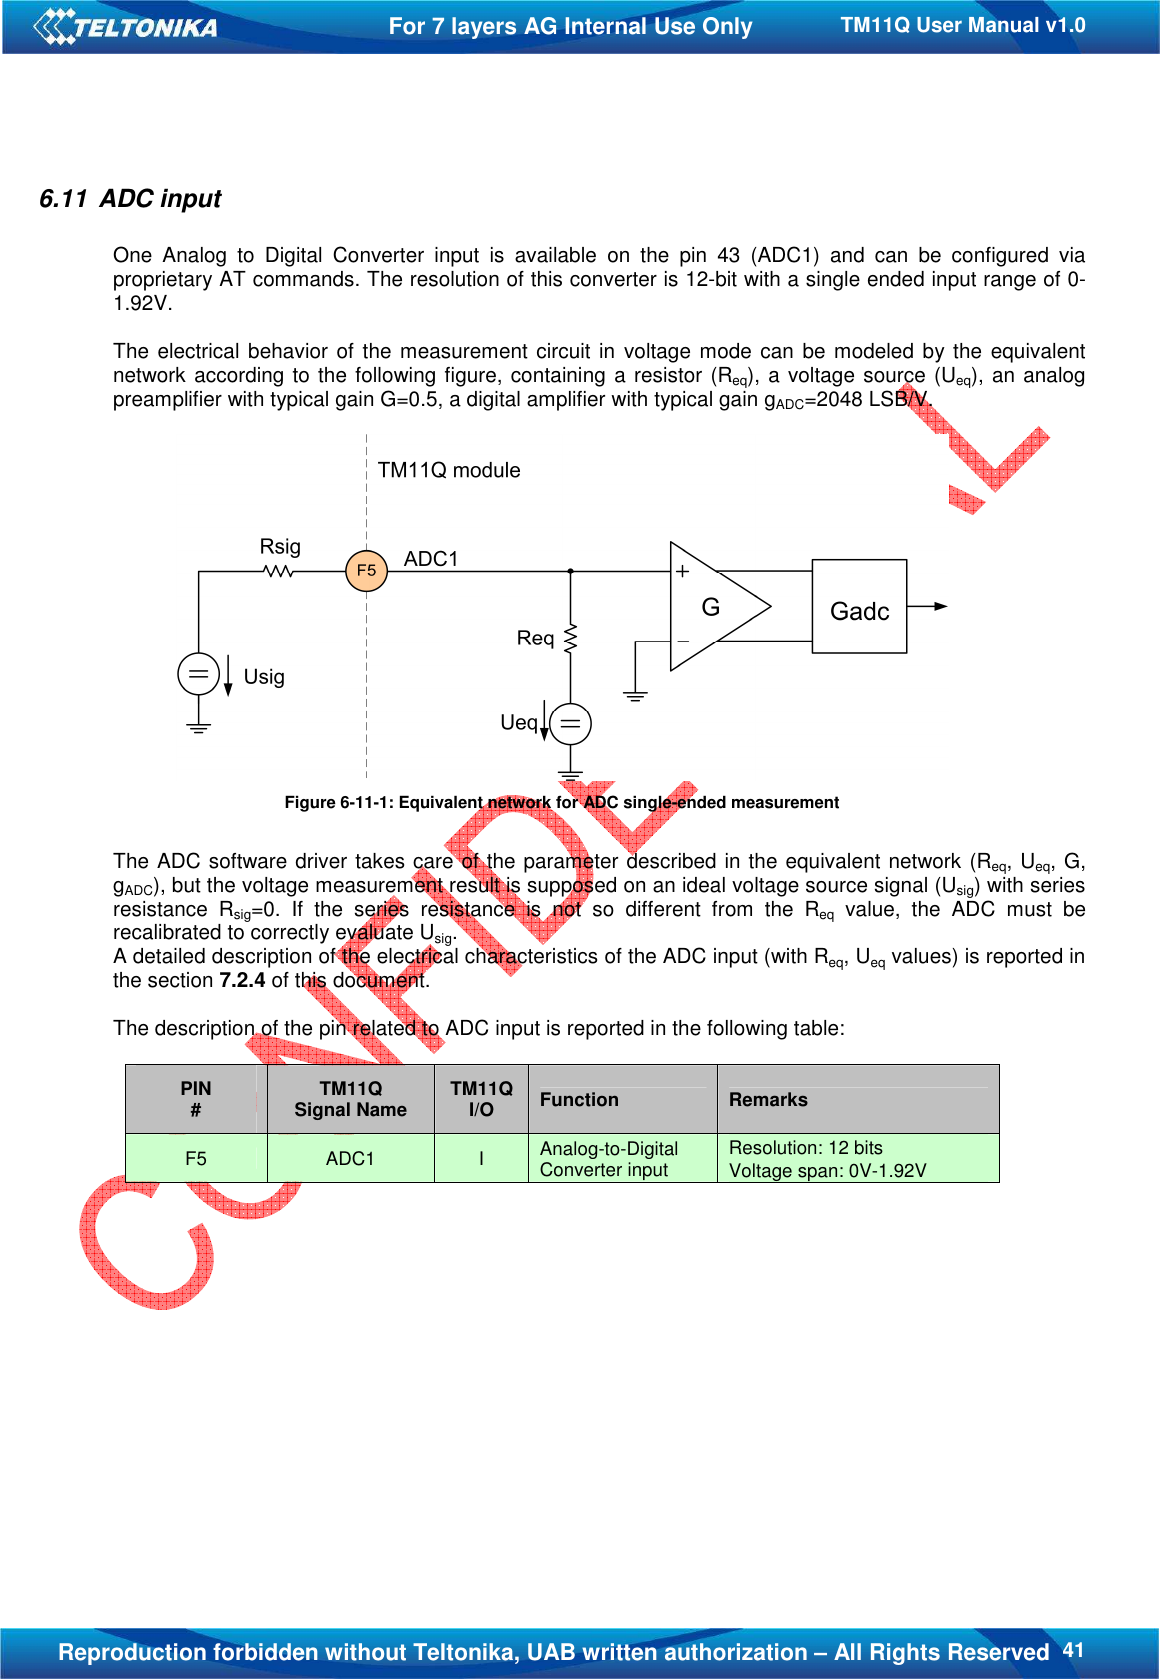   41TM11Q User Manual v1.0 For 7 layers AG Internal Use Only  Reproduction forbidden without Teltonika, UAB written authorization – All Rights Reserved 6.11  ADC input  One  Analog  to  Digital  Converter  input  is  available  on  the  pin  43  (ADC1)  and  can  be  configured  via proprietary AT commands. The resolution of this converter is 12-bit with a single ended input range of 0-1.92V.  The electrical behavior of the measurement circuit in  voltage mode can be modeled by the  equivalent network according to the following figure, containing a resistor (Req), a voltage source (Ueq), an analog preamplifier with typical gain G=0.5, a digital amplifier with typical gain gADC=2048 LSB/V.   Figure 6-11-1: Equivalent network for ADC single-ended measurement  The ADC software driver takes care of the parameter described in the equivalent network (Req, Ueq, G, gADC), but the voltage measurement result is supposed on an ideal voltage source signal (Usig) with series resistance  Rsig=0.  If  the  series  resistance  is  not  so  different  from  the  Req  value,  the  ADC  must  be recalibrated to correctly evaluate Usig. A detailed description of the electrical characteristics of the ADC input (with Req, Ueq values) is reported in the section 7.2.4 of this document.  The description of the pin related to ADC input is reported in the following table:  PIN #  TM11Q Signal Name  TM11Q I/O  Function  Remarks F5  ADC1  I  Analog-to-Digital Converter input  Resolution: 12 bits Voltage span: 0V-1.92V     